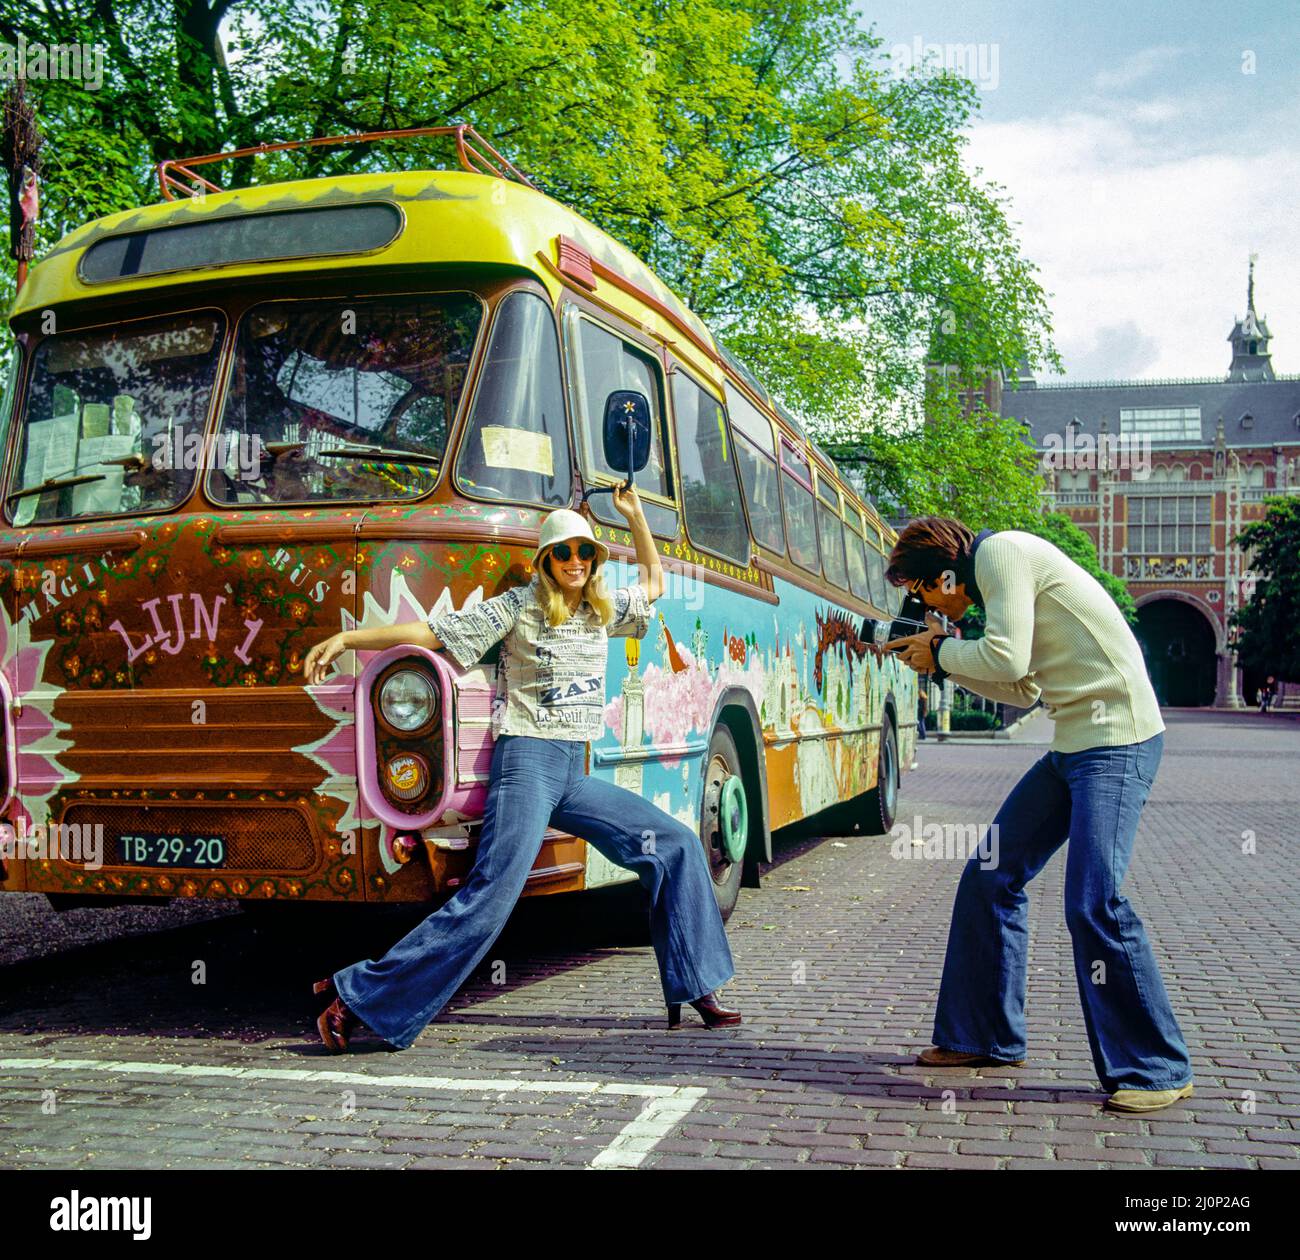 Vintage Amsterdam 1970s, couple taking funny pictures, hippy styled decorated bus, Holland, Netherlands, Europe, Stock Photo